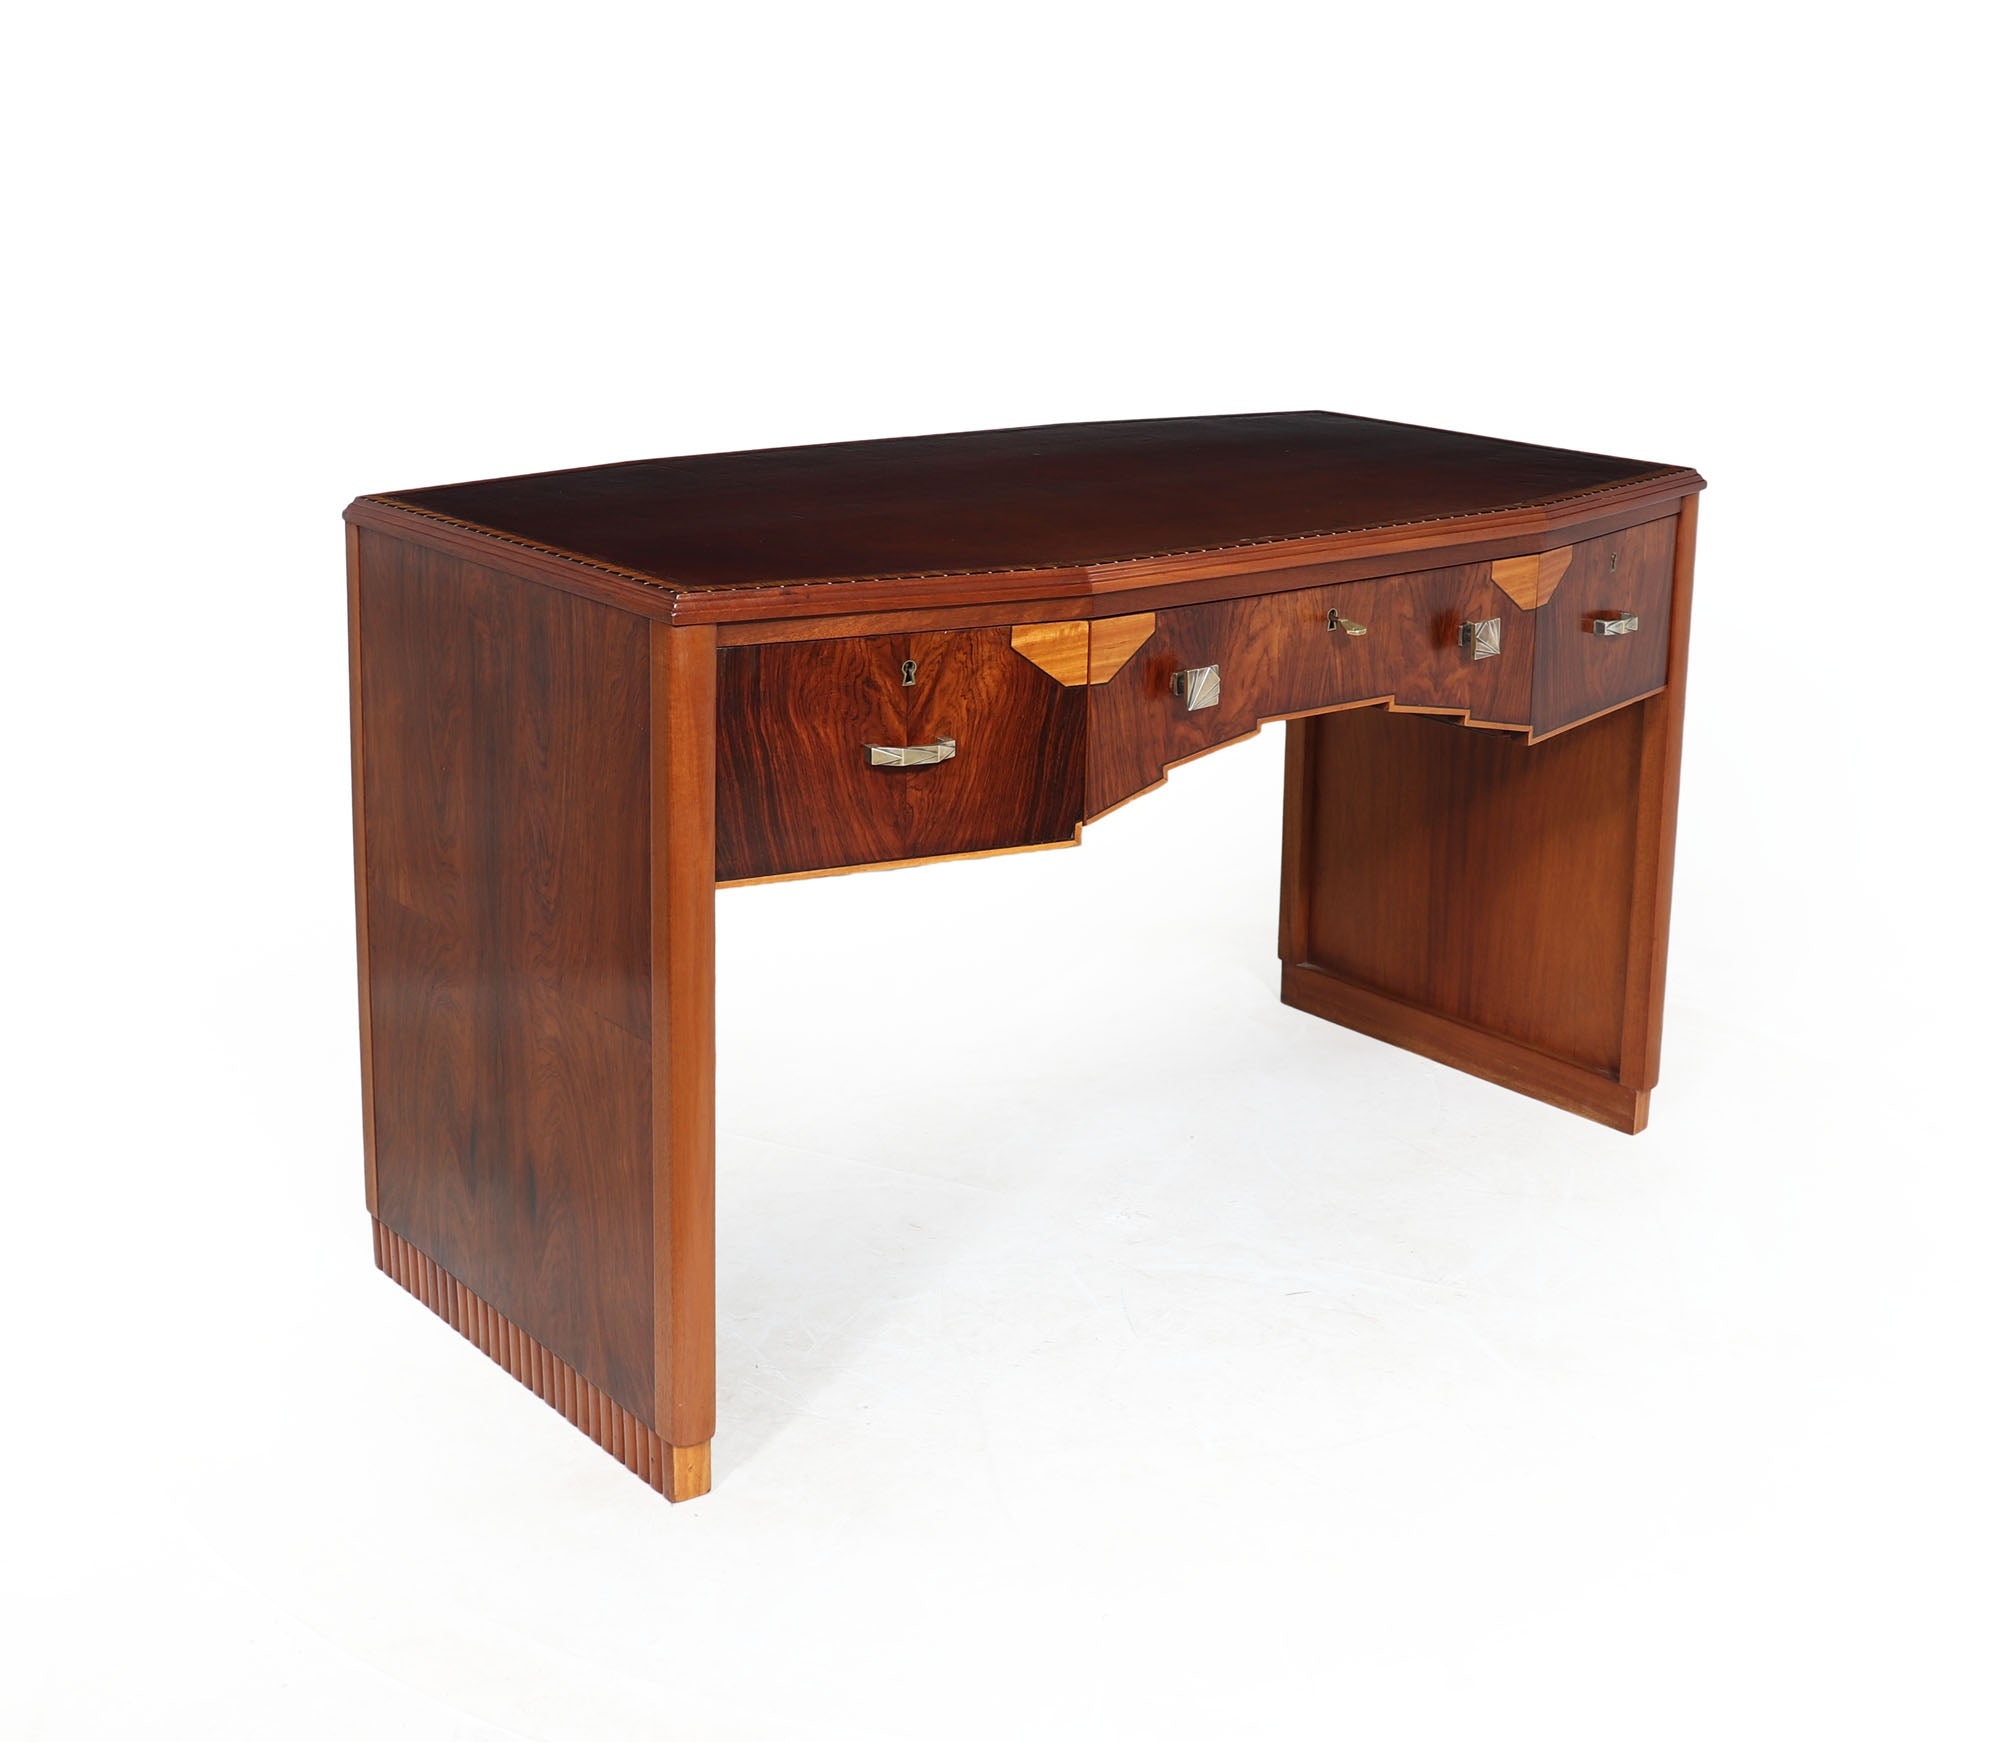 French Art Deco Rosewood Desk c1925 – The Furniture Rooms